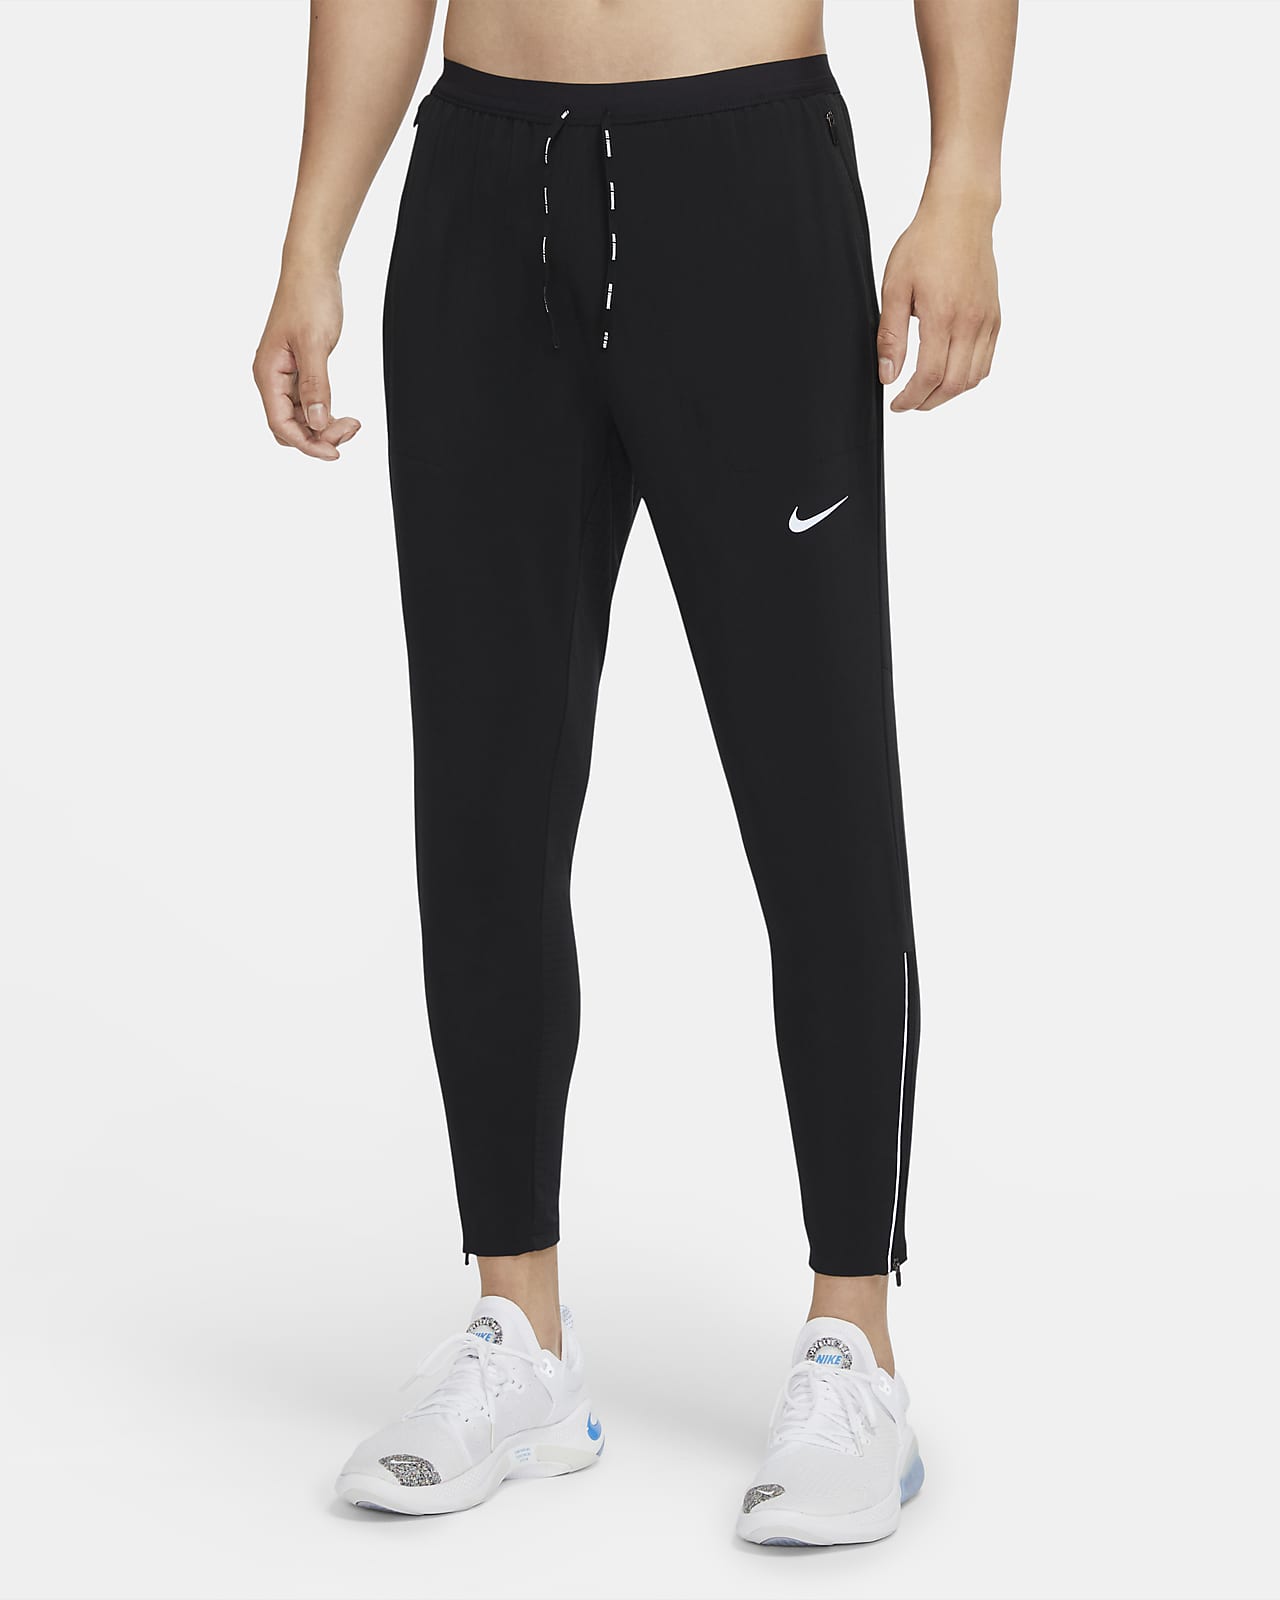 https://static.nike.com/a/images/t_PDP_1280_v1/f_auto,q_auto:eco/a47e3562-c11c-4029-b511-2ee8a4218bbb/phenom-elite-woven-running-trousers-qww7Hr.png